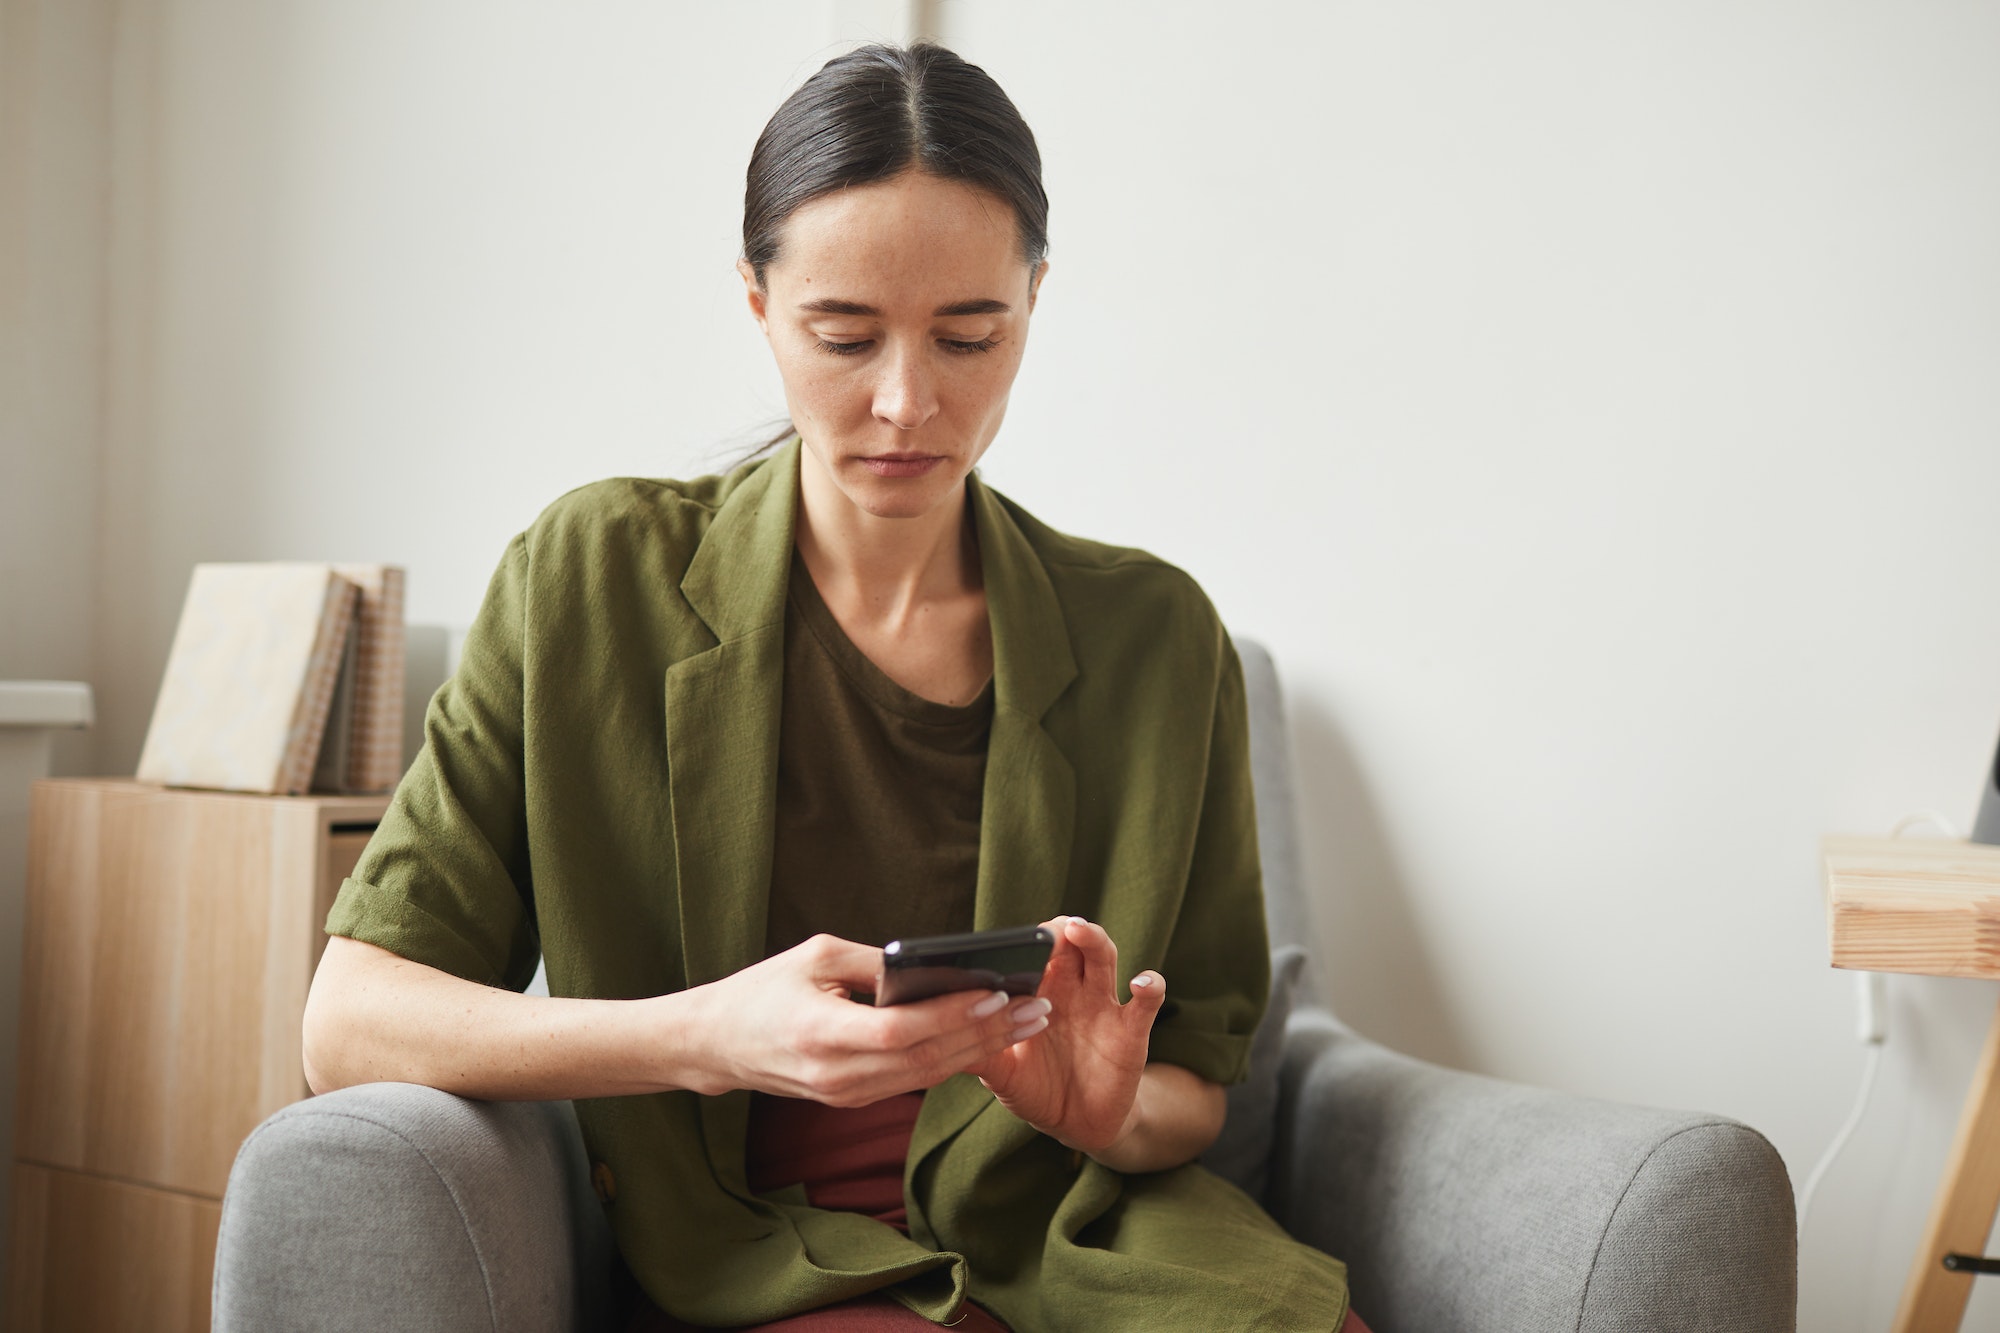 Serious Woman Using Smartphone at Home